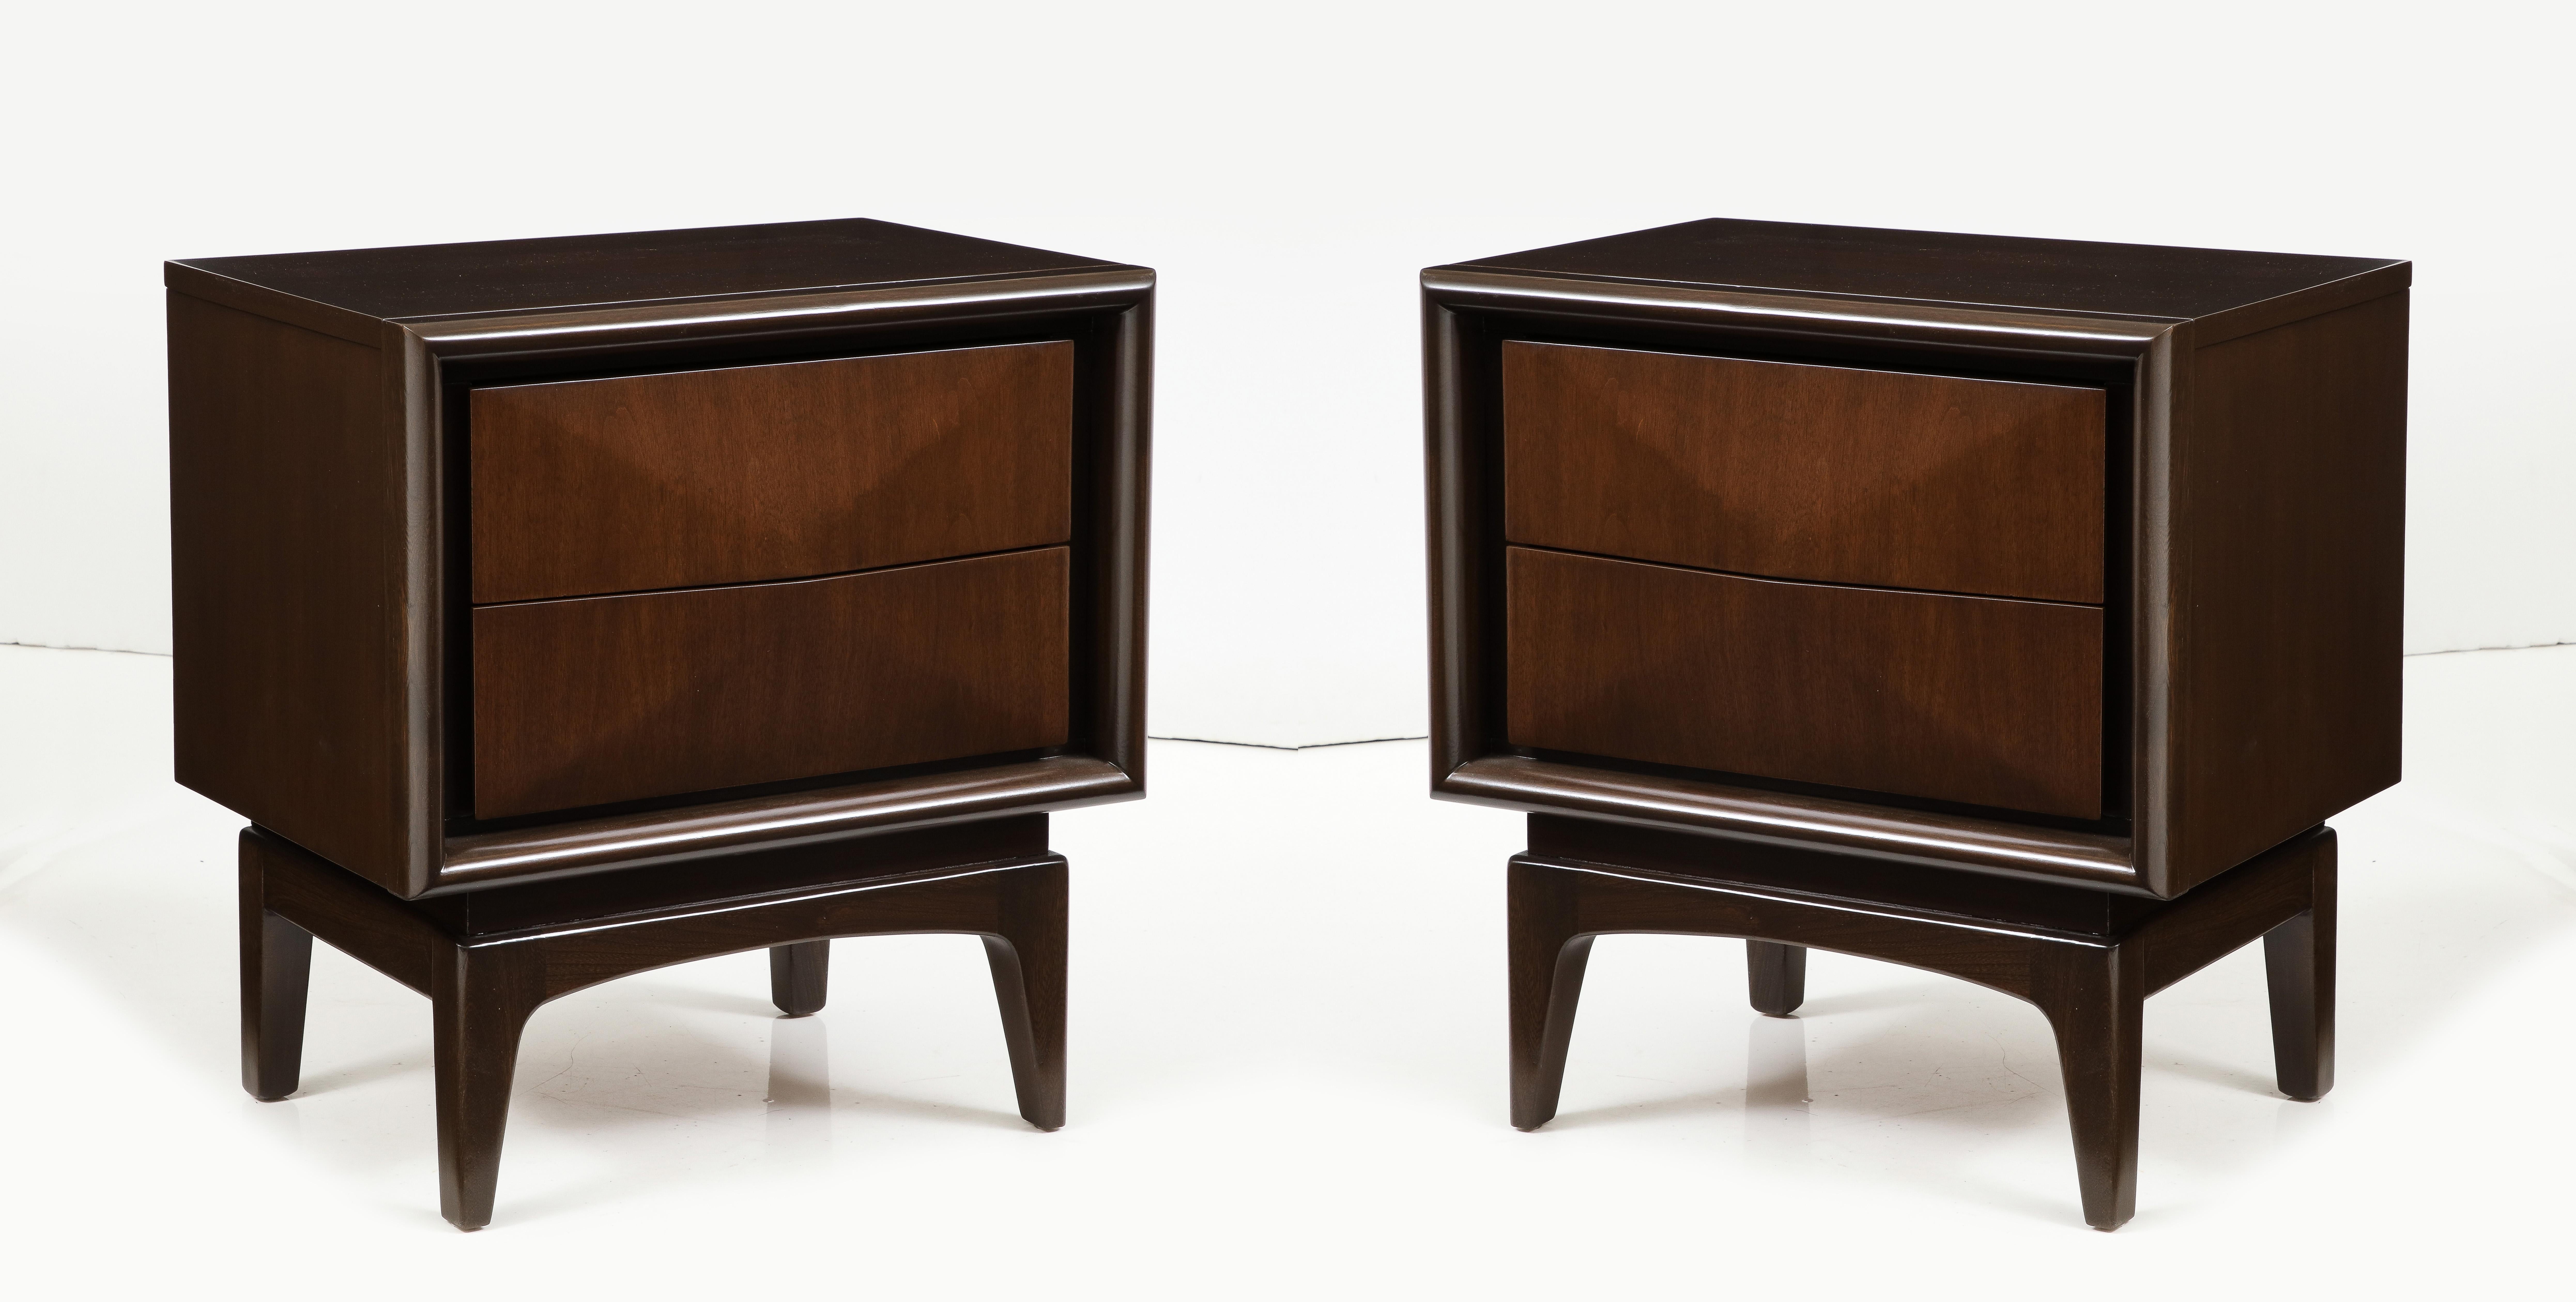 Pair of Mid Century diamond front Walnut nightstands featuring 2 drawers. Case sits upon sculptural splayed legs. Mint Restored condition in a medium brown stain.